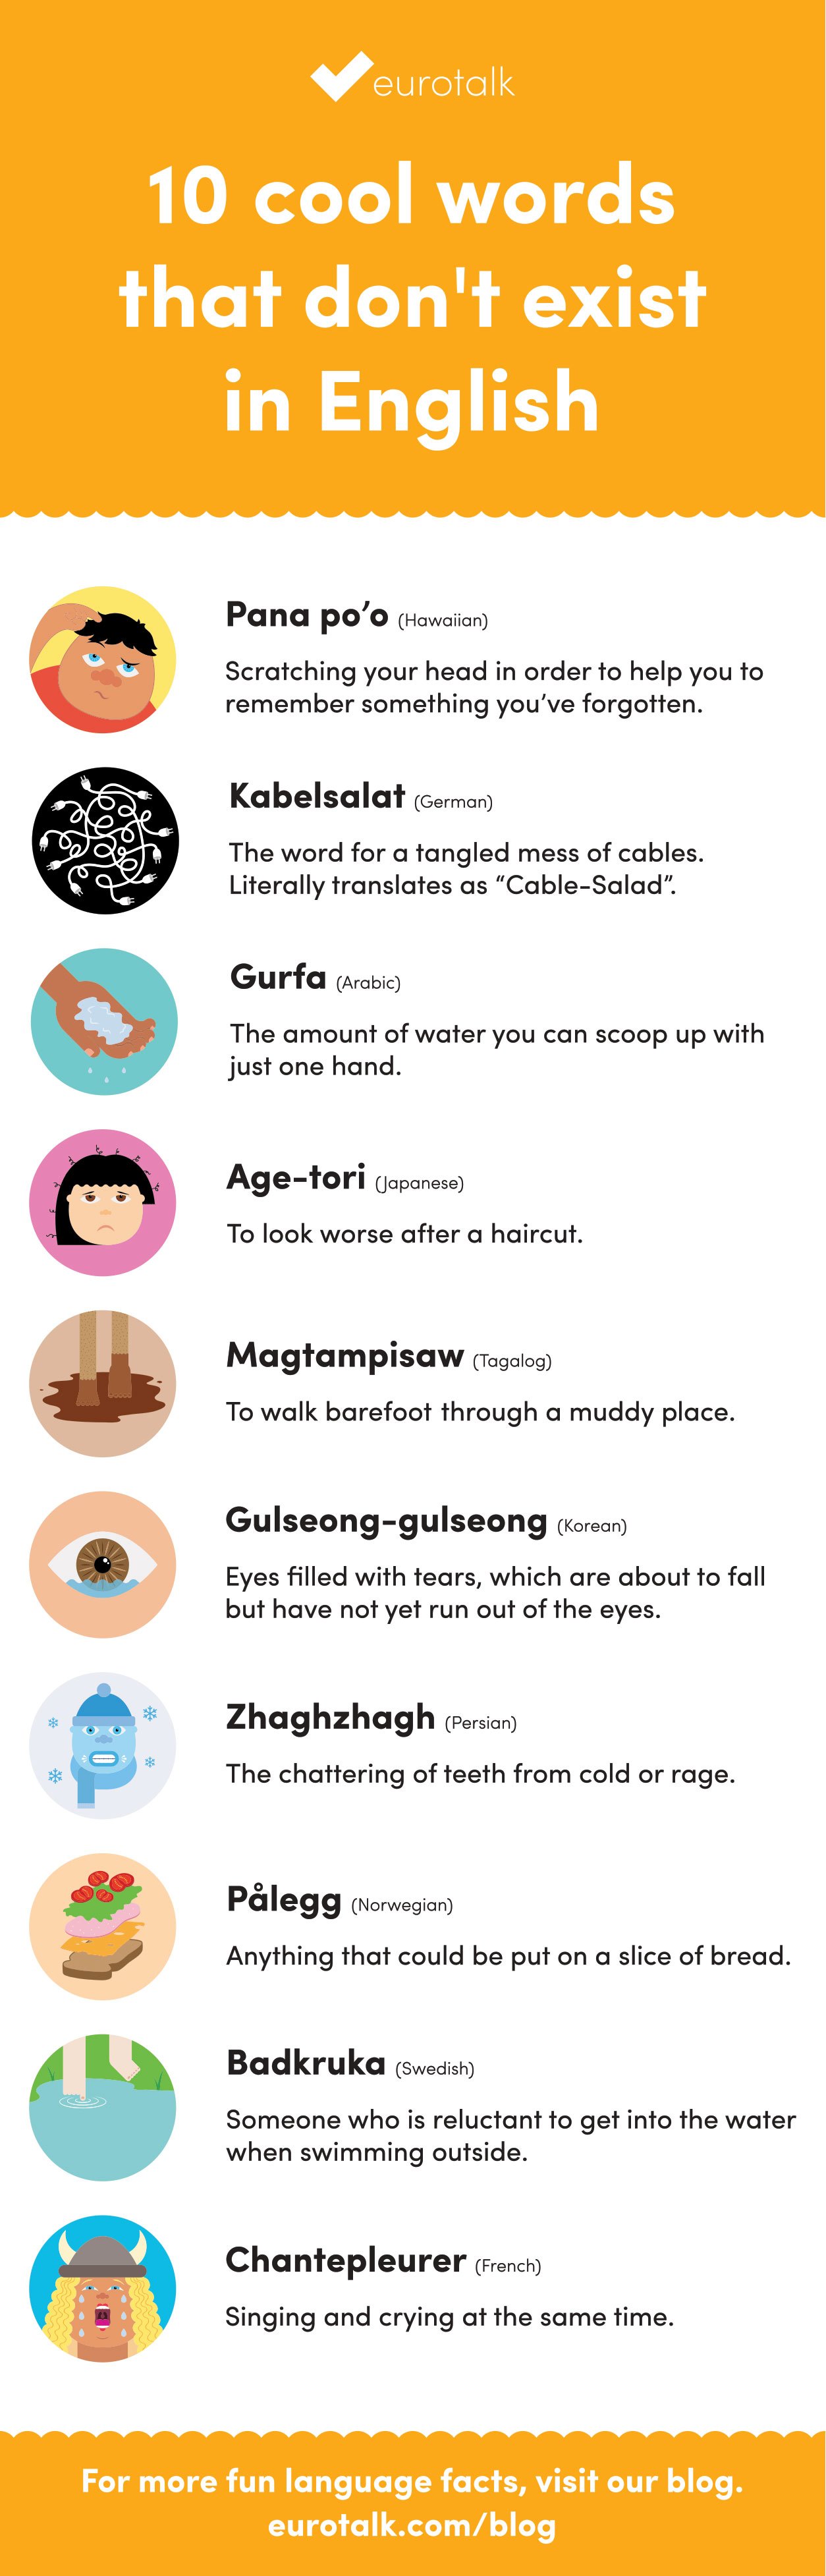 10 cool words that don’t exist in English - Infographic